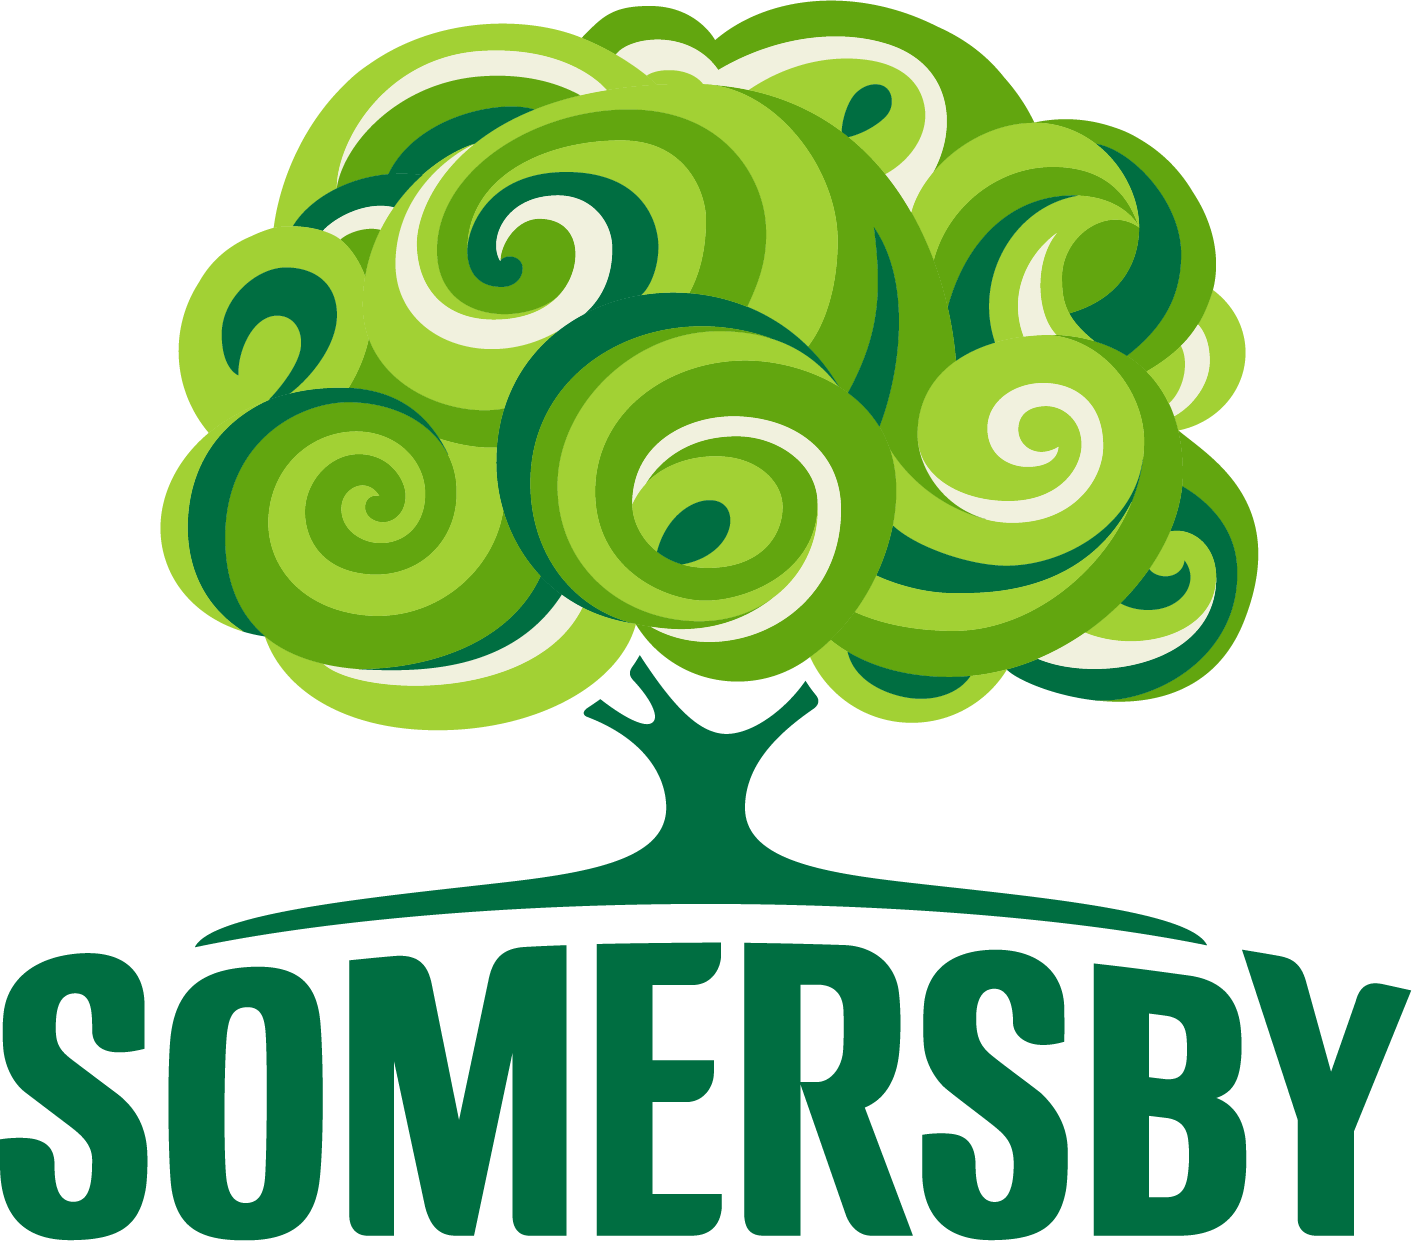 Enter to Win - Somersby